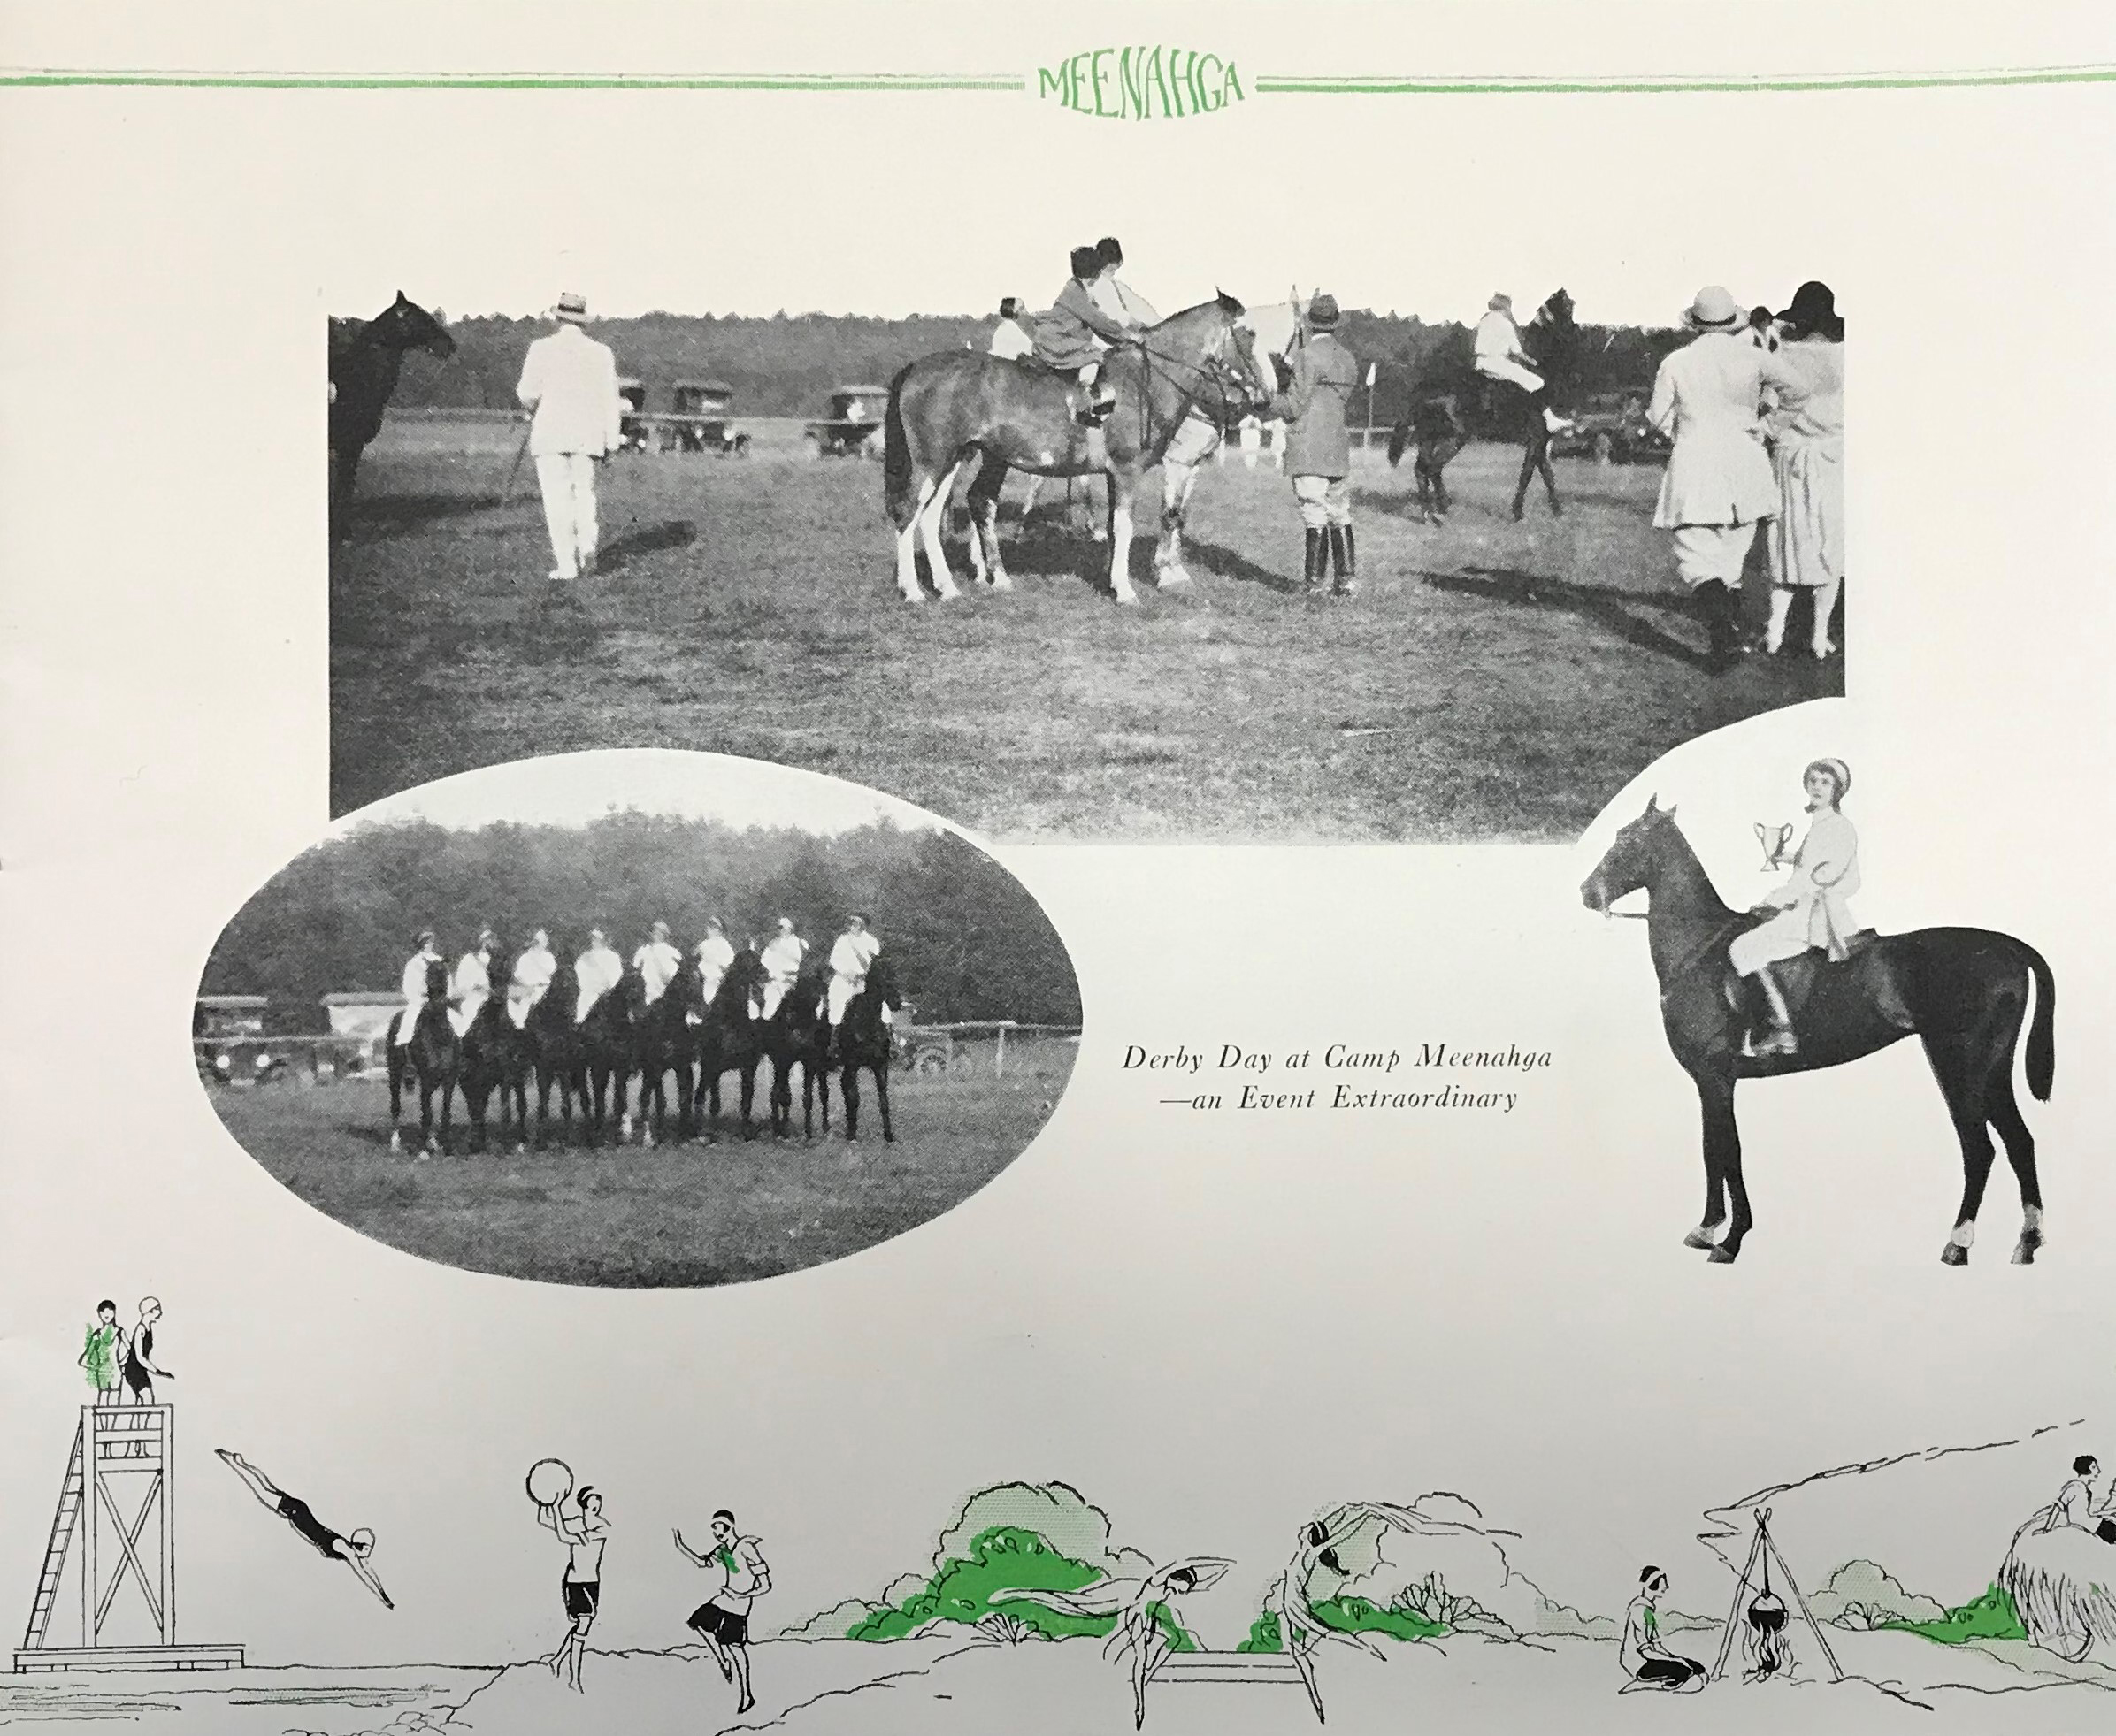 Camp Meenahga's 1928 brochure included images of Saddlebred horses used to teach English riding